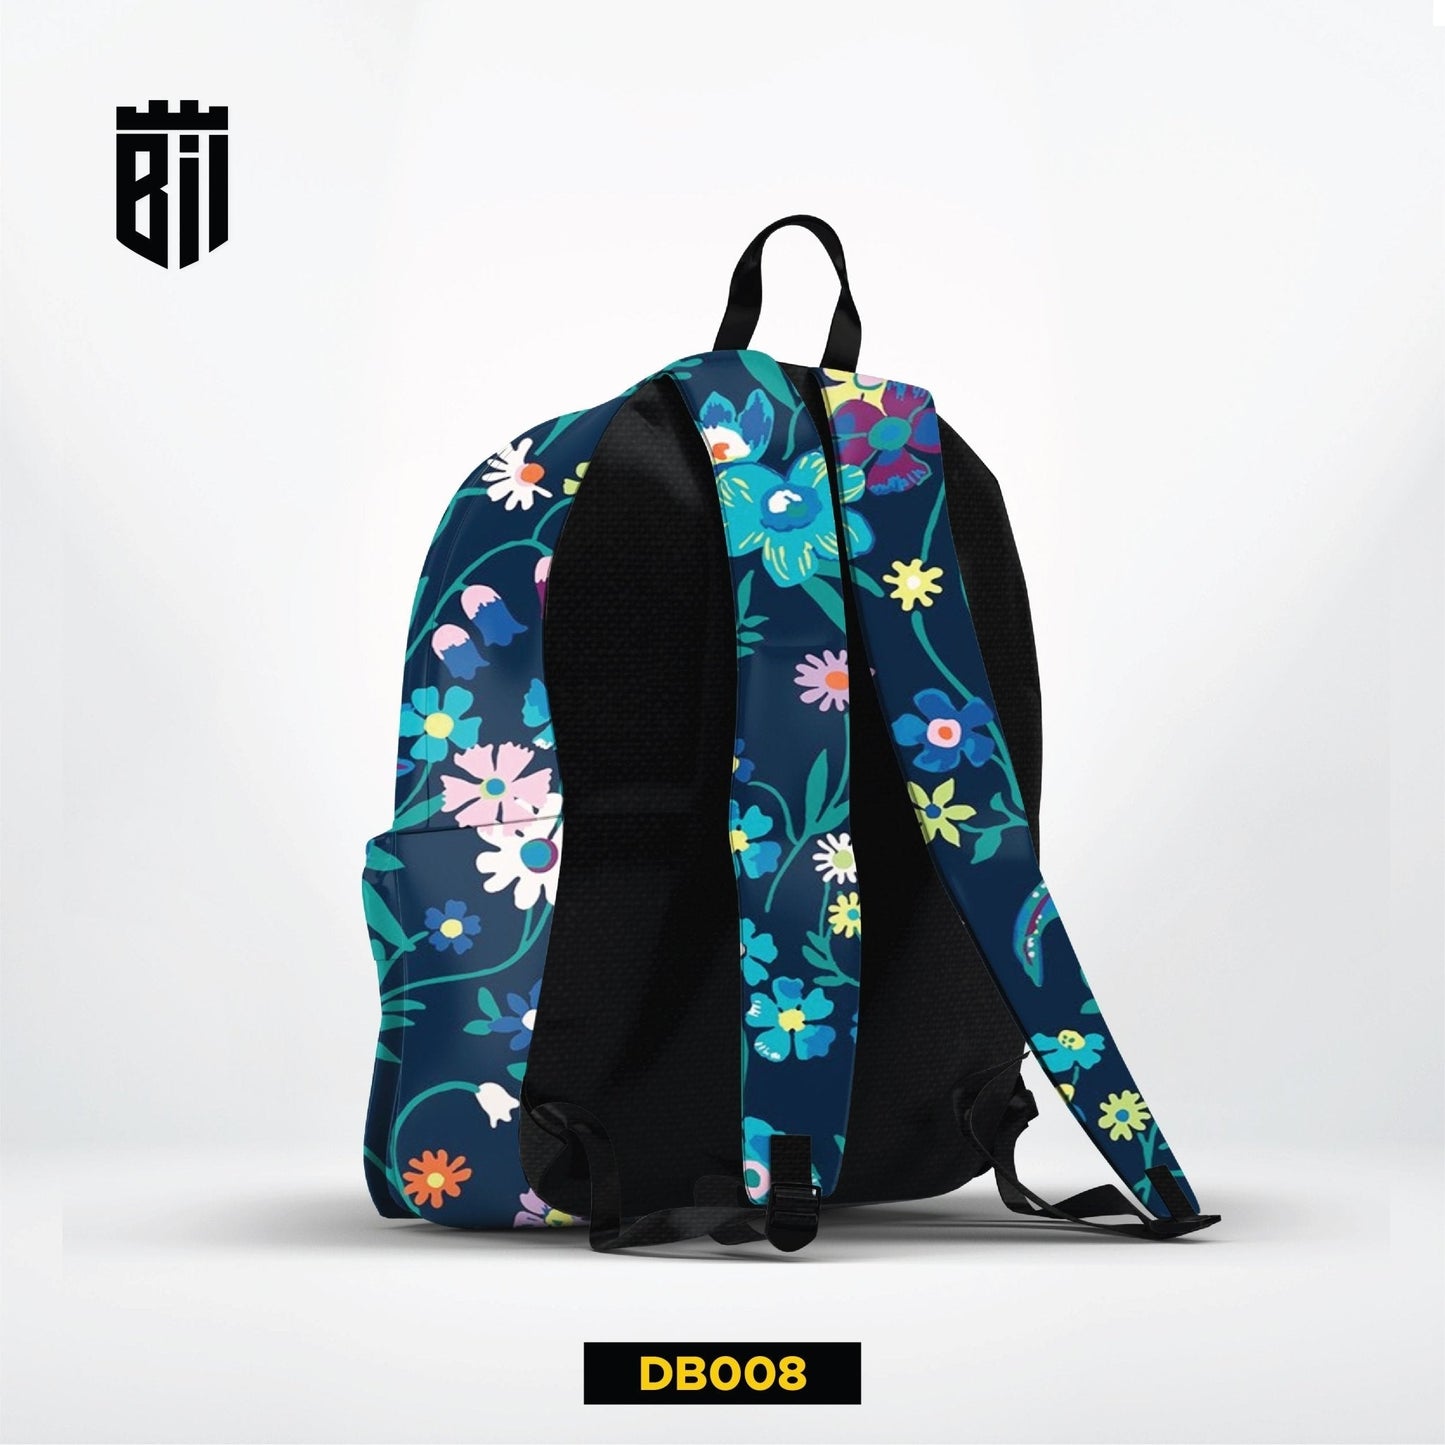 DB008 Blue Floral Allover Printed Backpack - BREACHIT